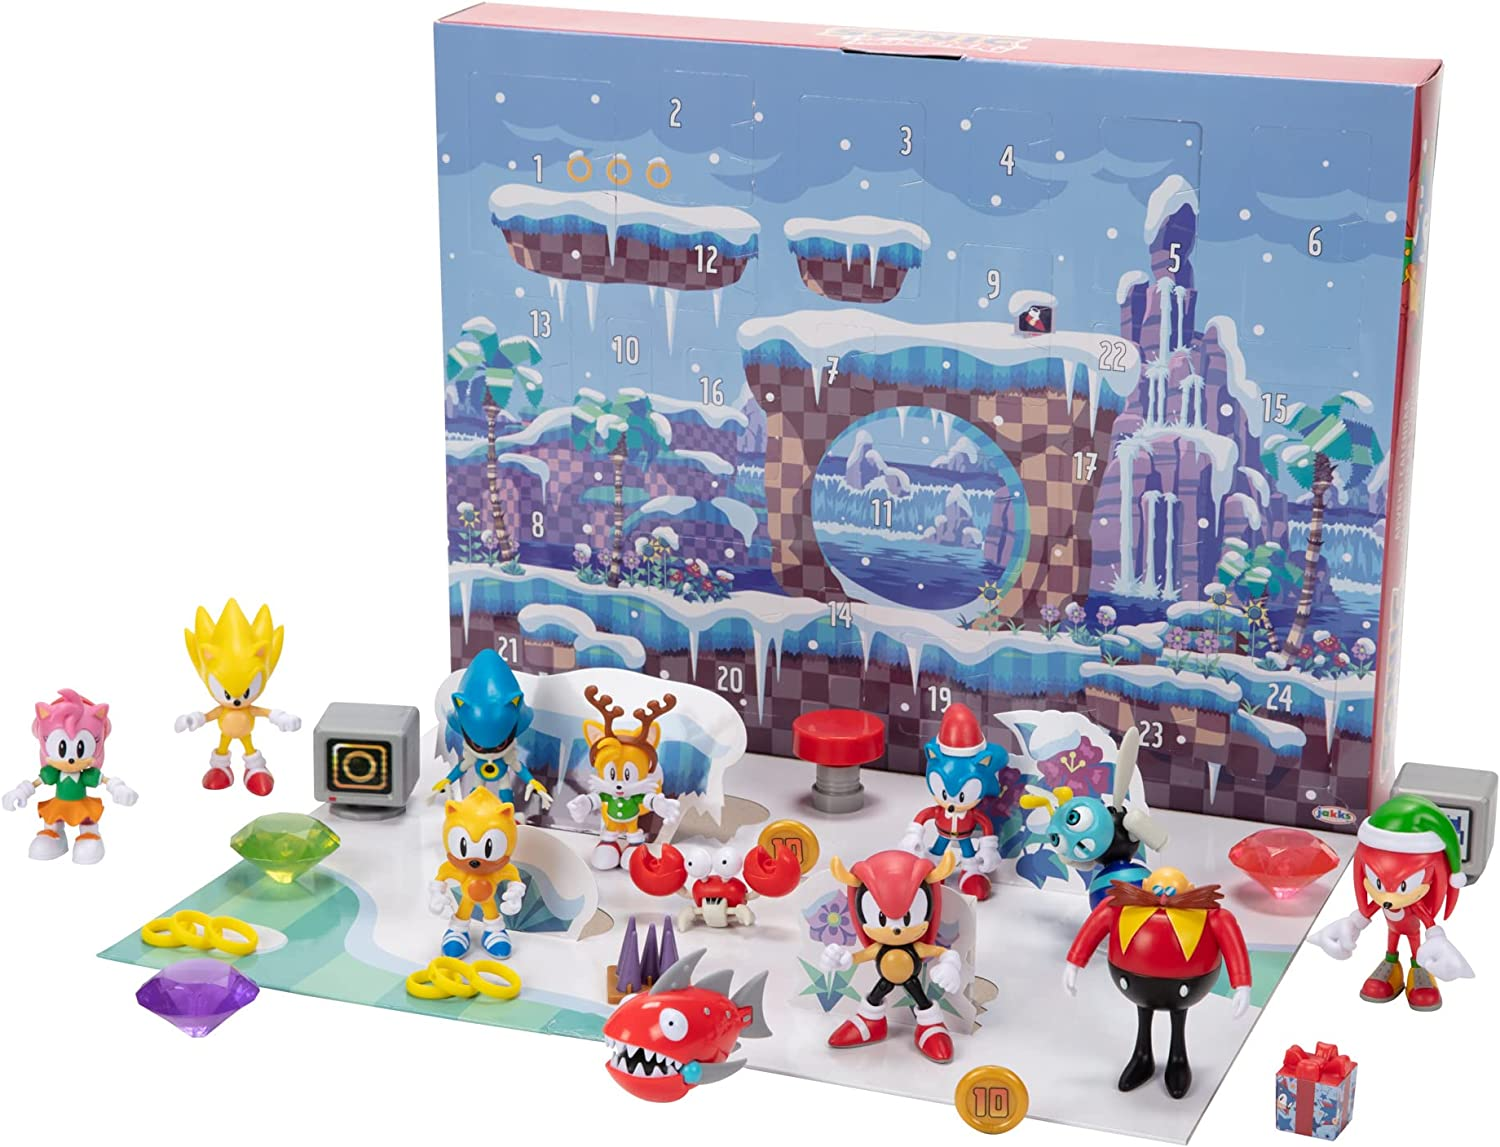 Sonic the Hedgehog Advent Calendar Exclusive Holiday Figures! Hello